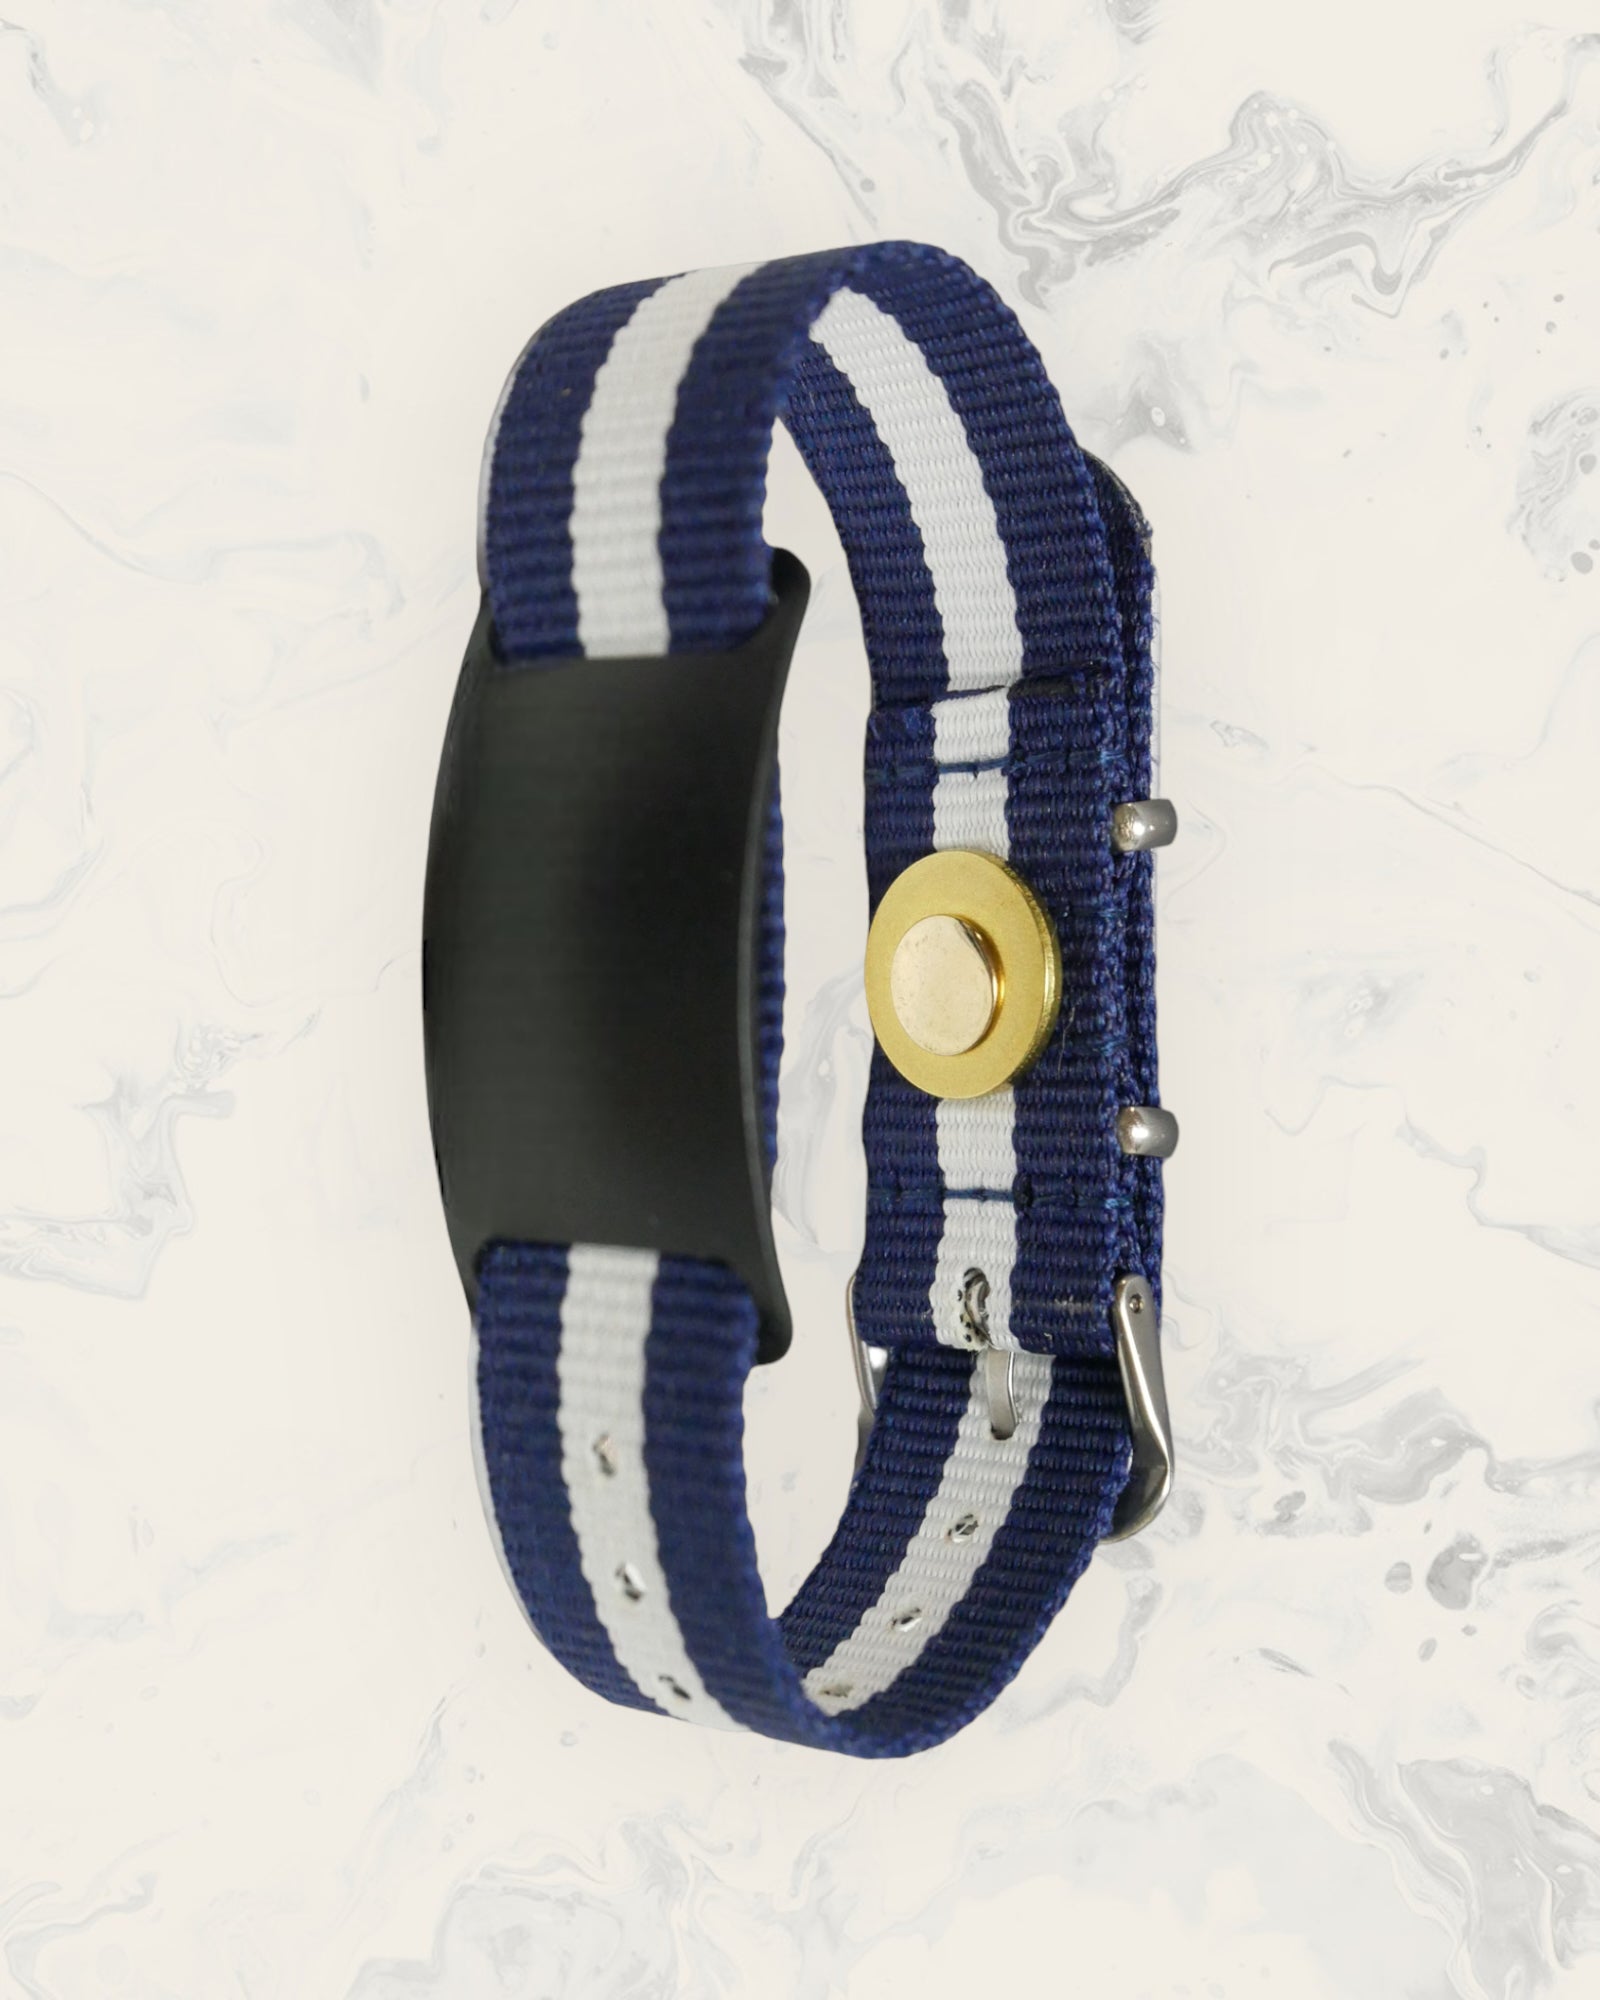 Frequency Jewelry Natural Pain Relief and EMF Protection Bracelet Nylon Band Color Navy Blue and White Striped with a Black Slider